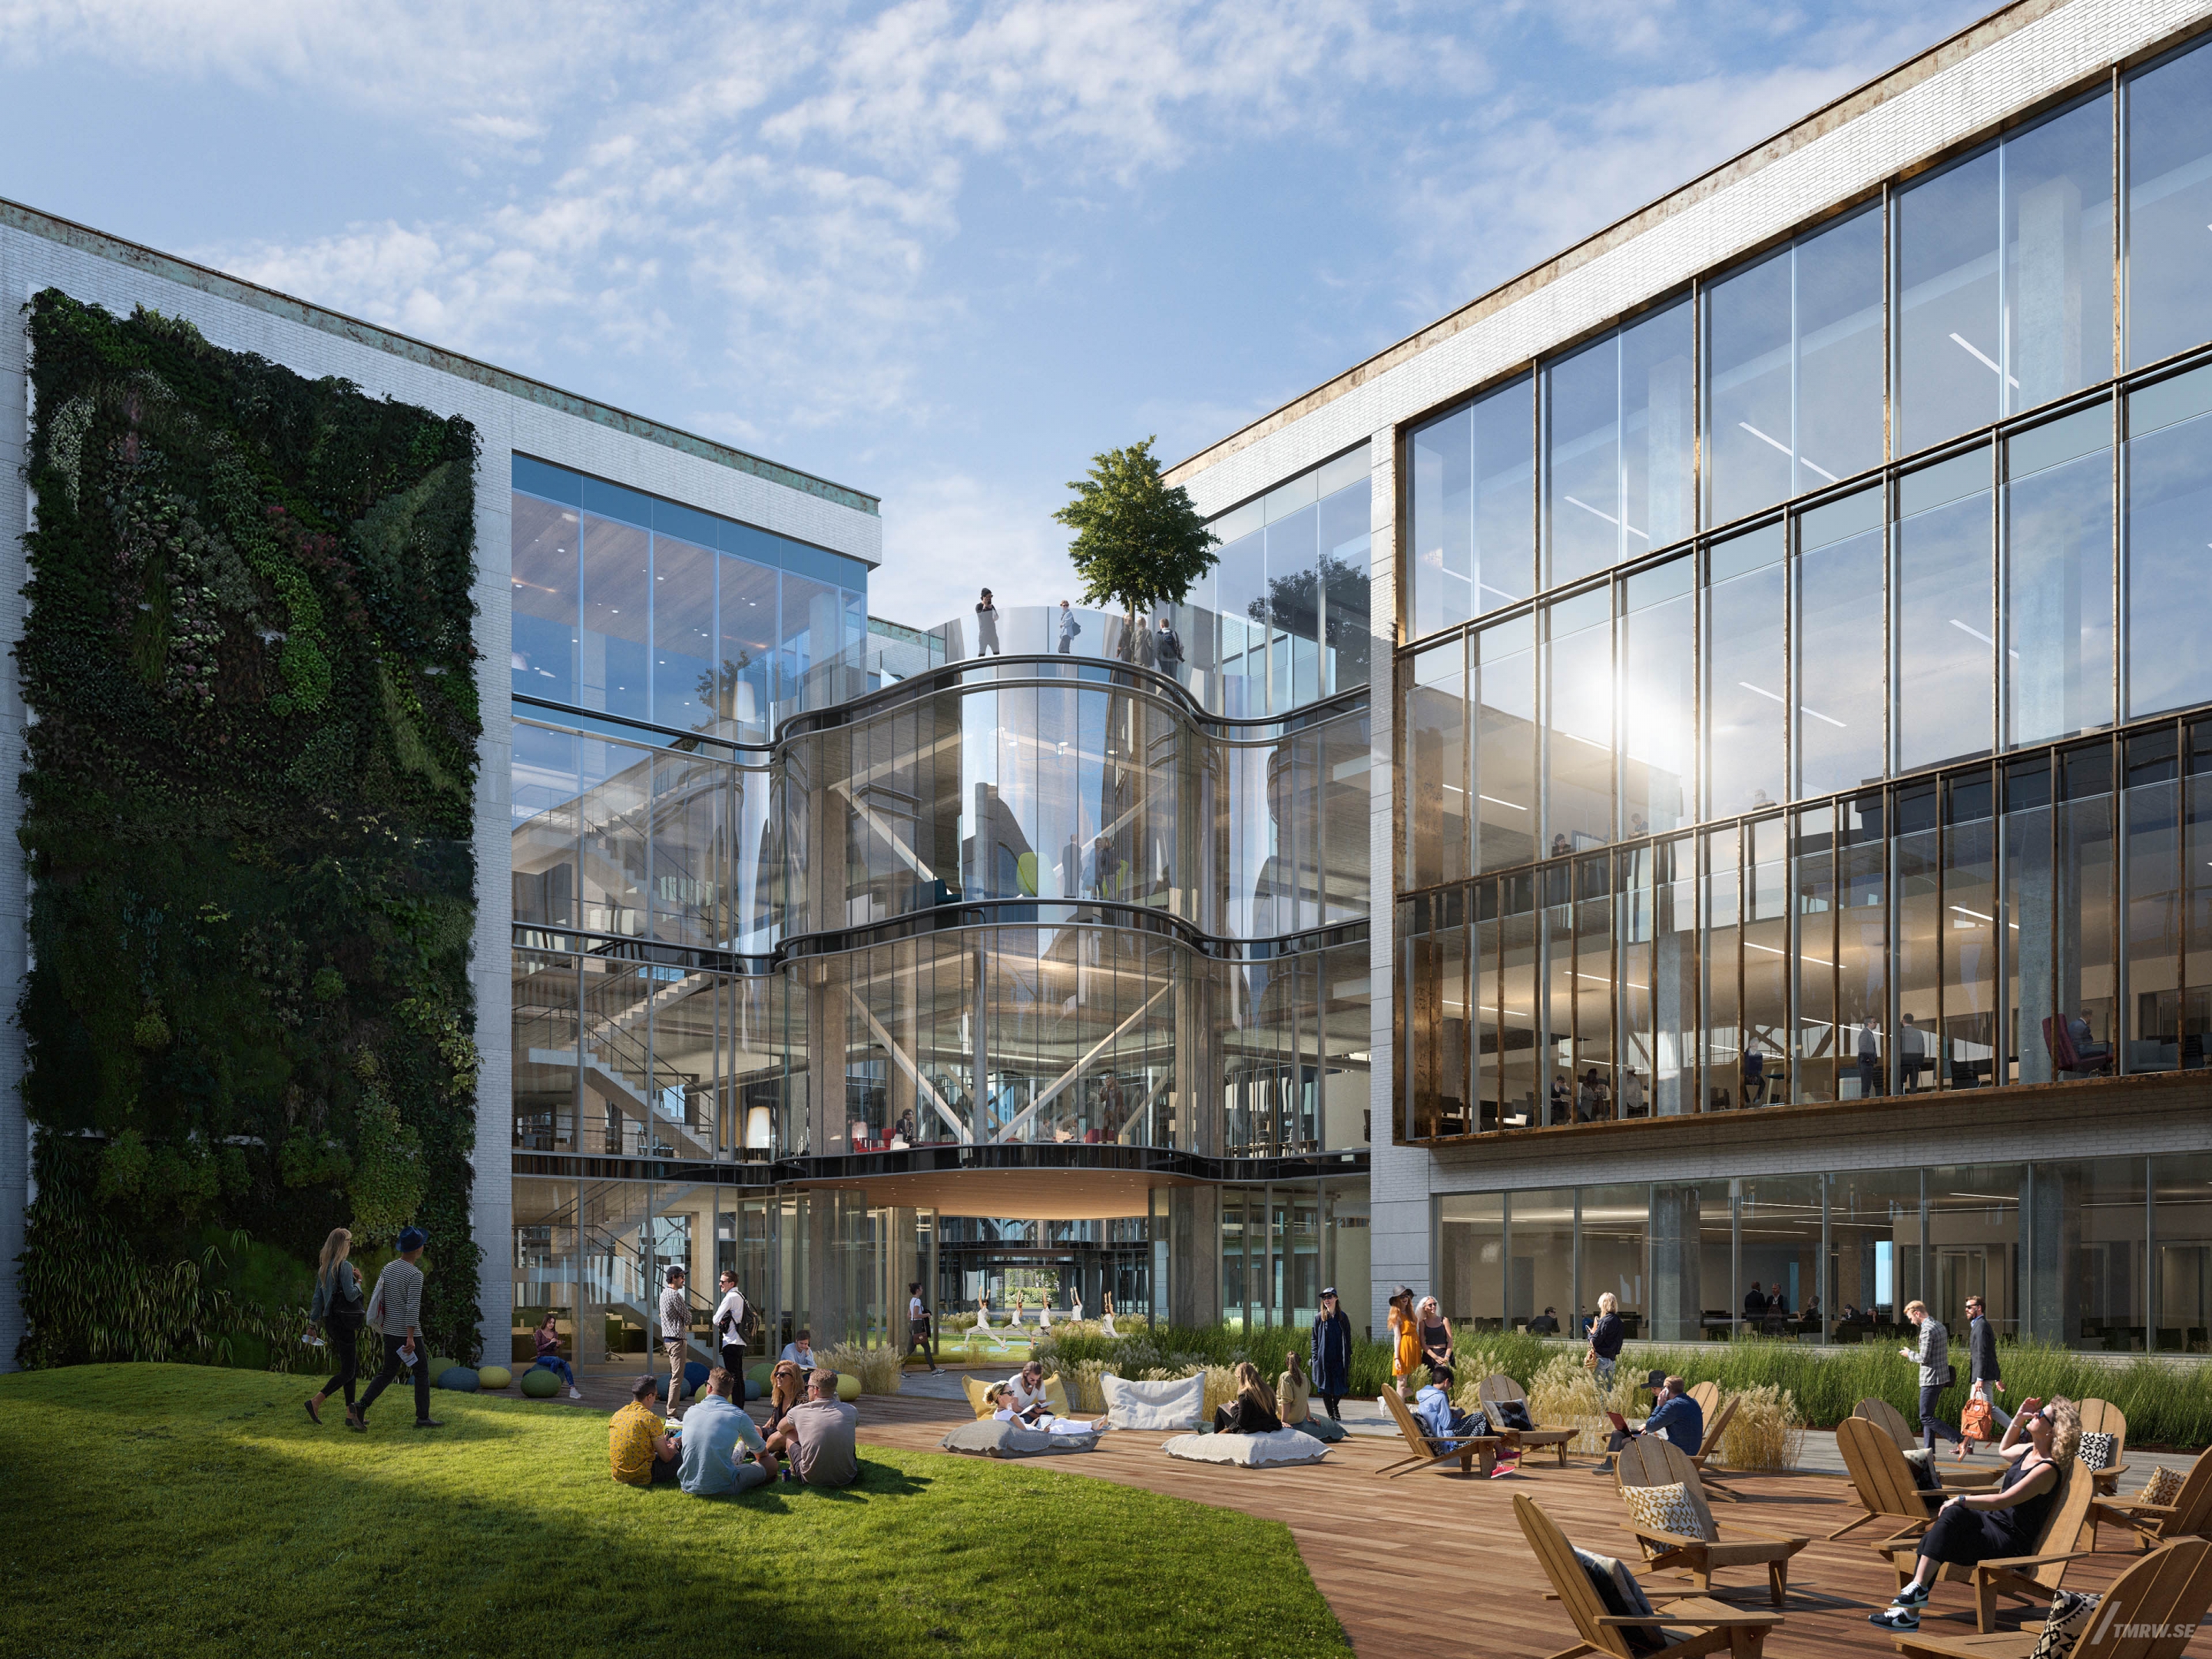 Architectural visualization of 3M for Gensler, an office building in day light from a park view.